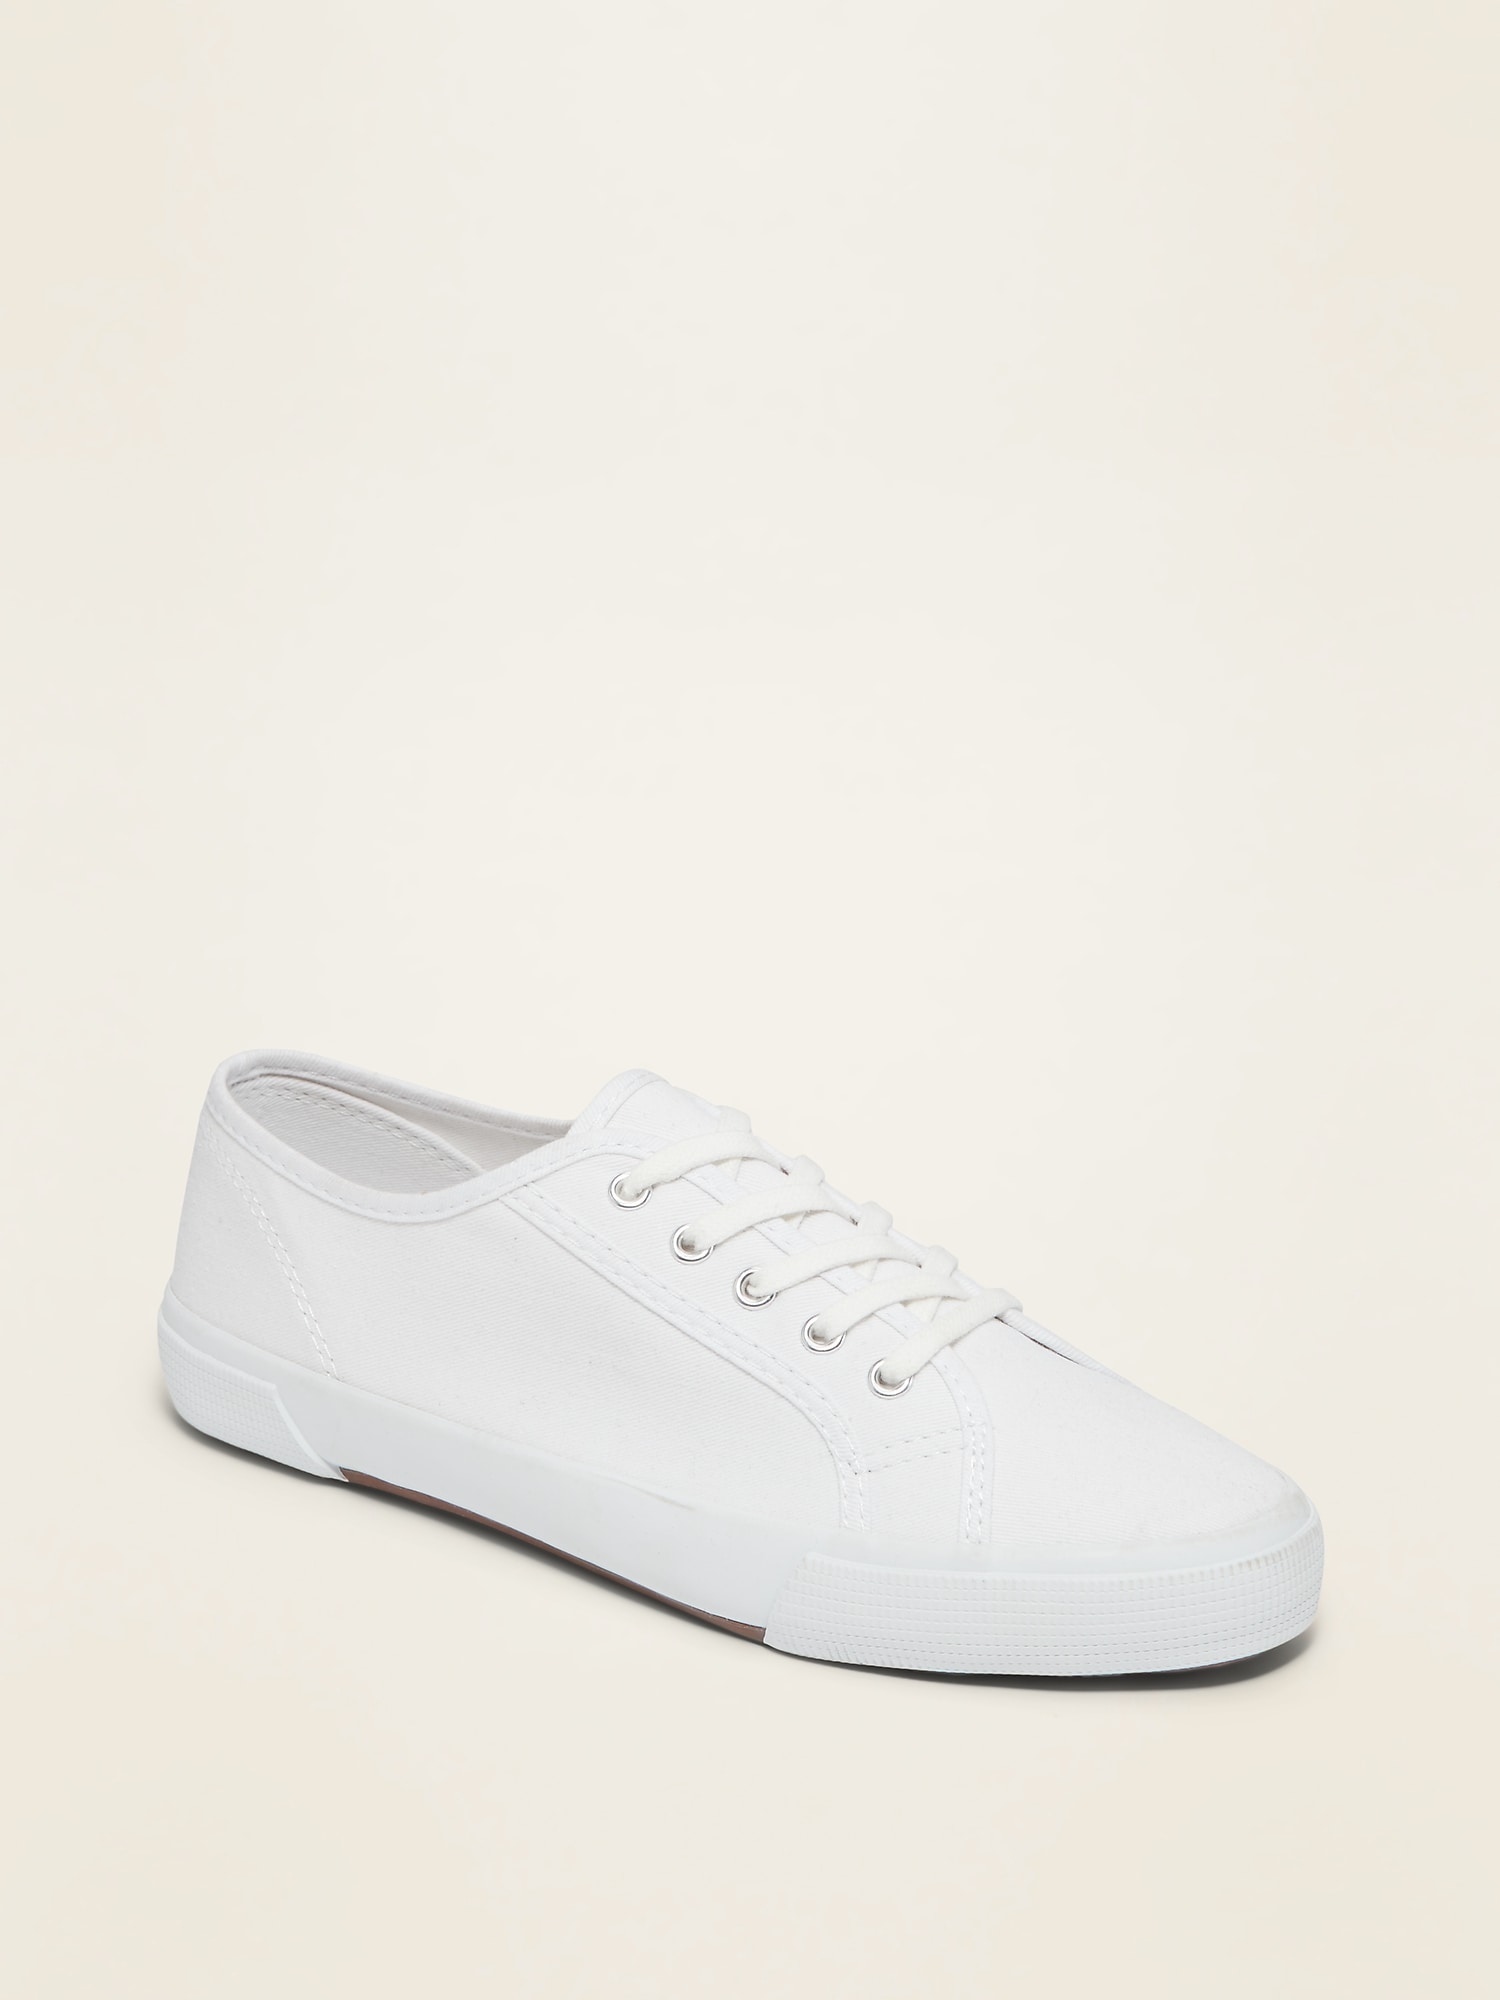 louis vuitton shoes sneakers price